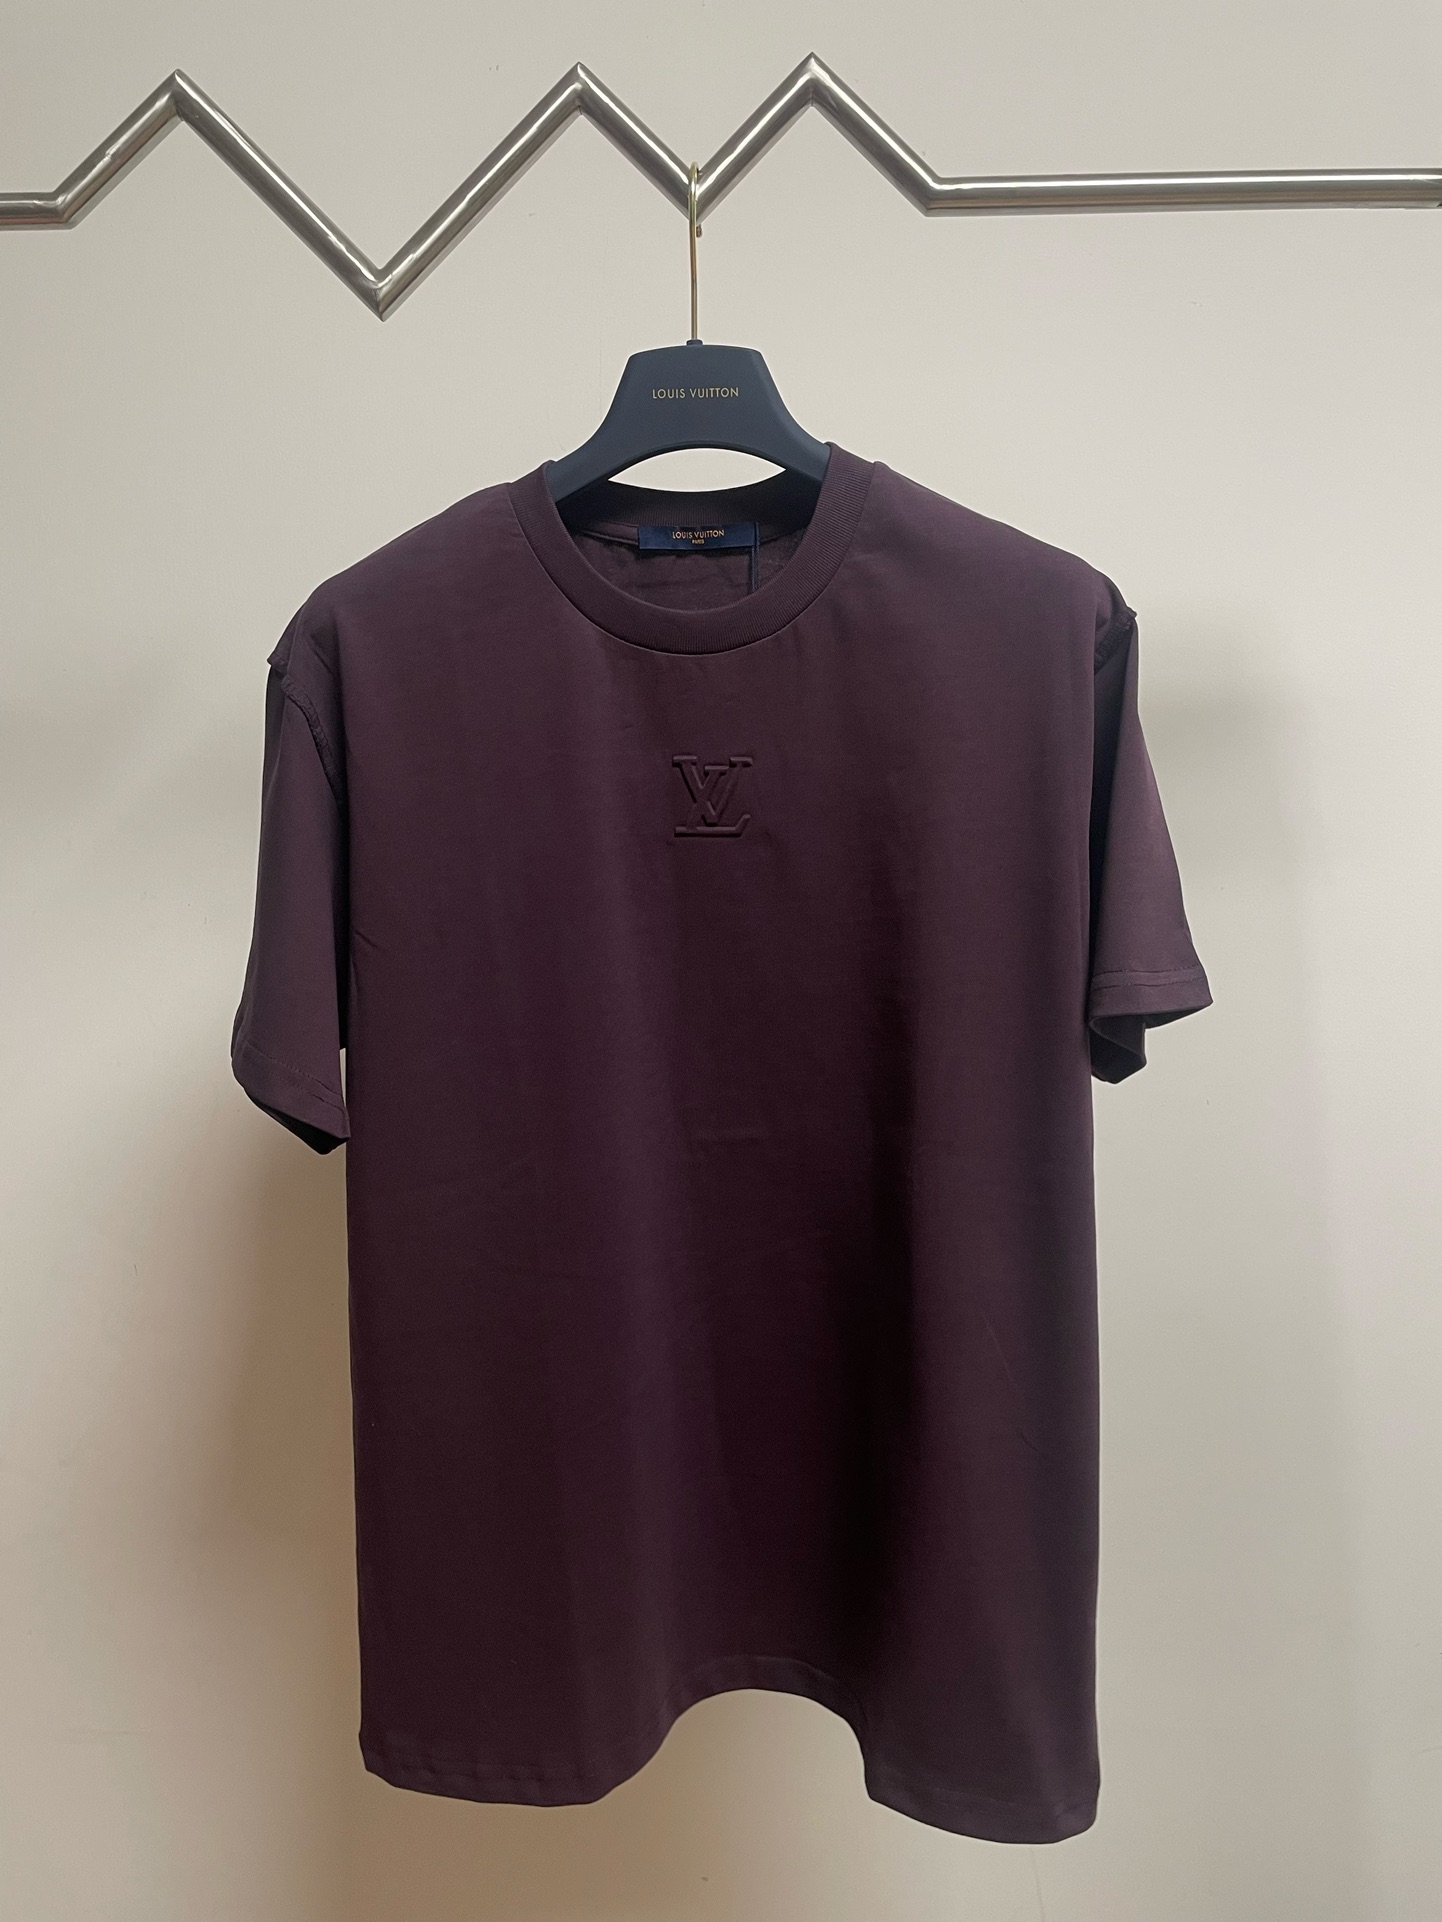 Louis Vuitton Flawless
 Clothing T-Shirt Purple Unisex Cotton Spring/Summer Collection Short Sleeve